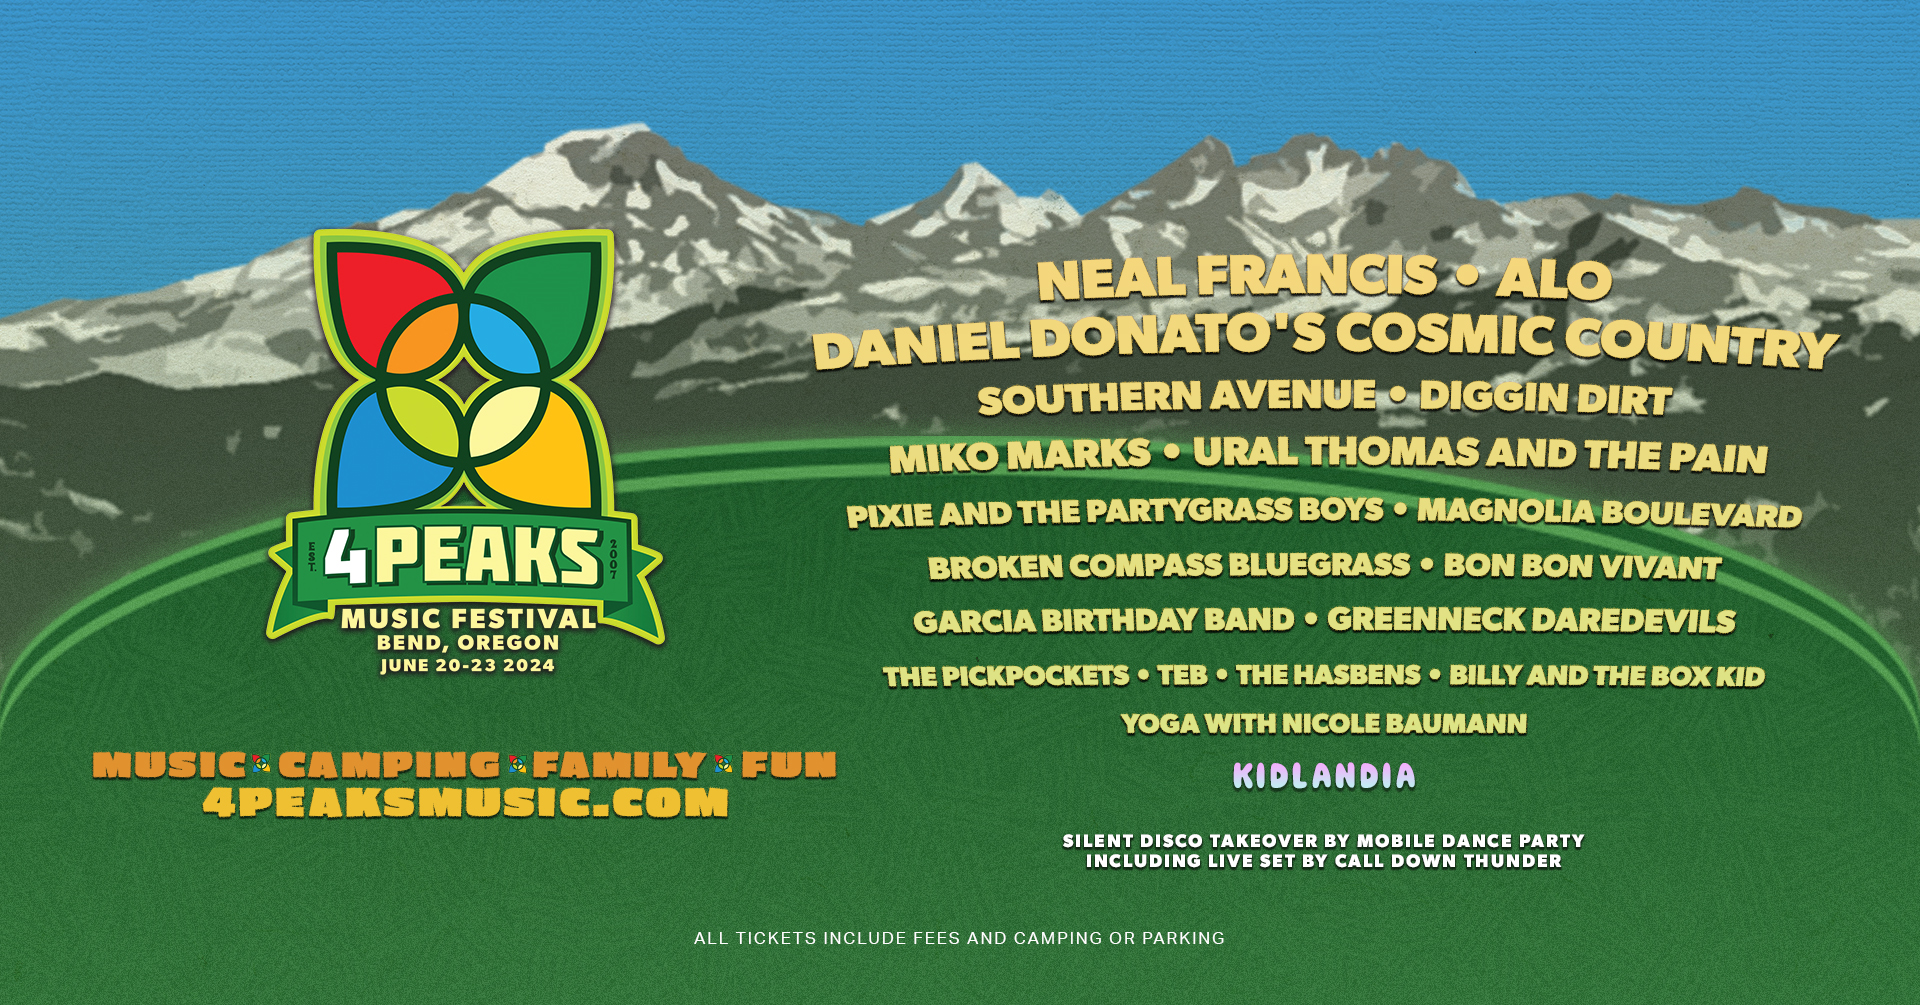 4 Peaks Music Festival Brings Its Musical Summer Solstice Celebration Back to Bend for the 16th Family-Friendly Event June 20-23